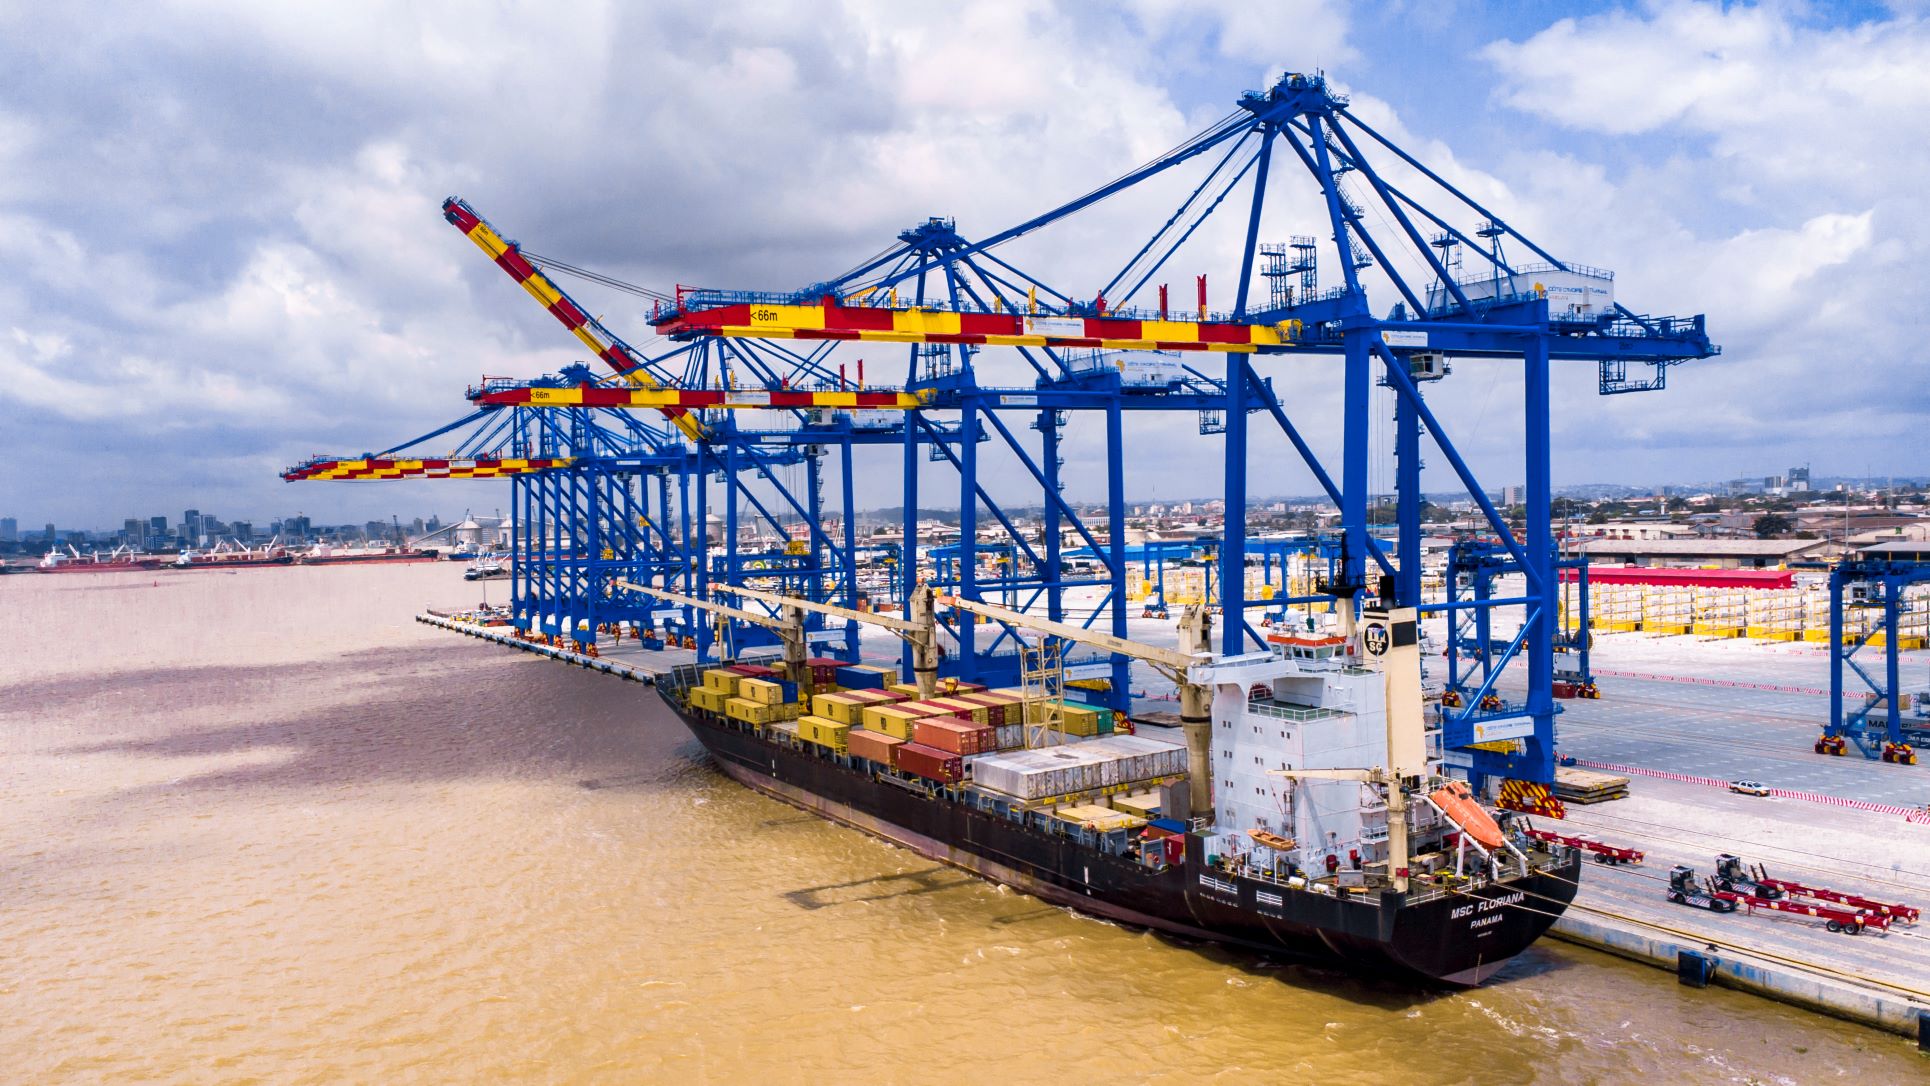 CÔTE D’IVOIRE TERMINAL SUCCESSFULLY COMPLETES THE FIRST TEST PORT CALL AT THE NEW CONTAINER TERMINAL IN THE PORT OF ABIDJAN